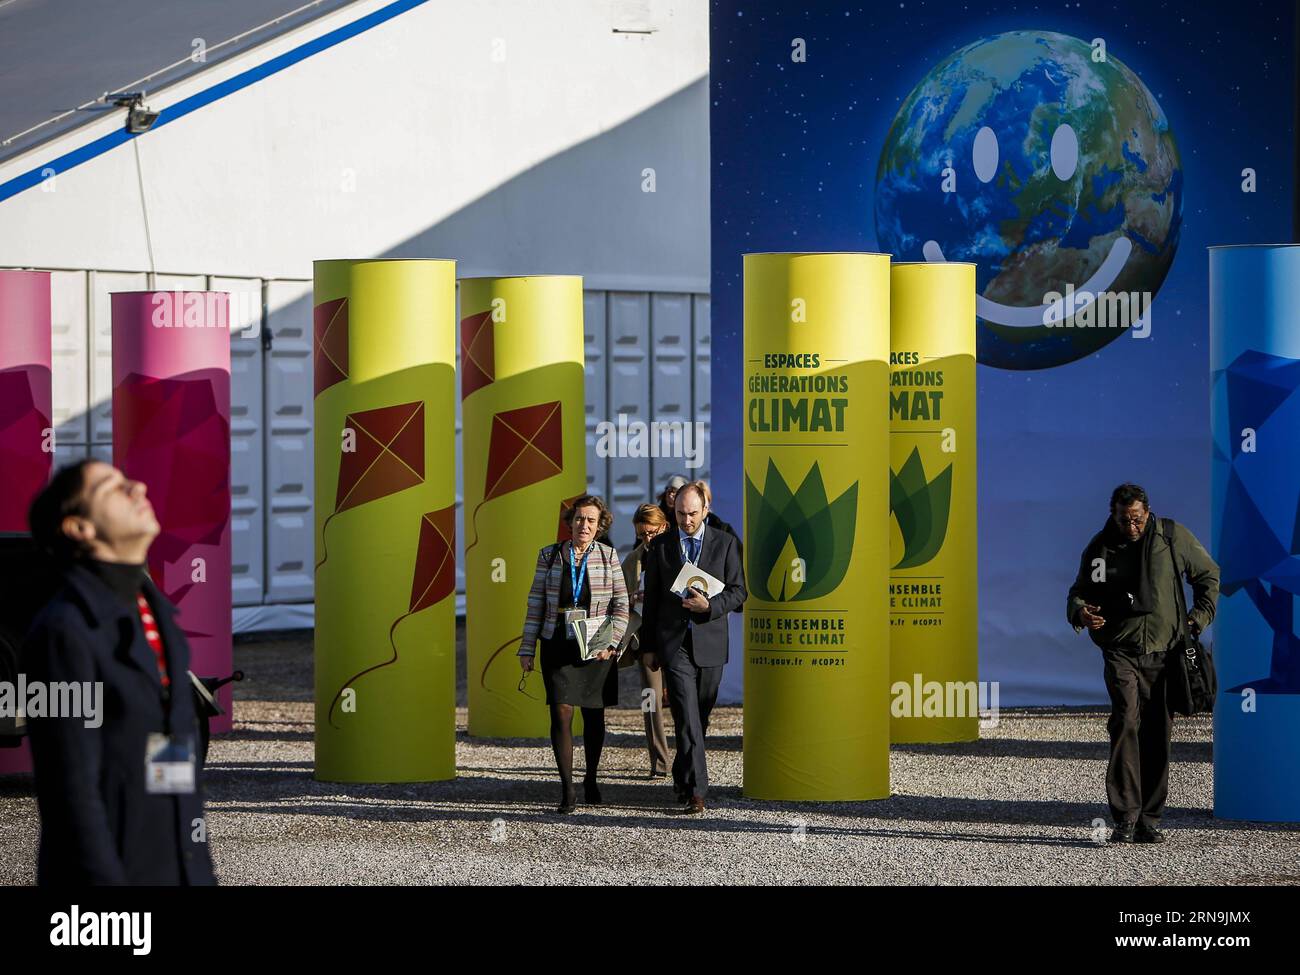 (151209) -- PARIS, Dec. 9, 2015 -- Participants walk at the venue of Paris Climate Change Conference at Le Bourget on the northern suburbs of Paris, France, Dec. 9, 2015. French Foreign Minister and President of Paris Climate Conference Laurent Fabius presented a new clean version of text for a global climate agreement on Wednesday as a basis for further negotiations among countries in the next 48 hours. The main outstanding issues that remain to be resolved include post-2020 climate finance, ambition of action and how to reflect the principle of common but differentiated responsibility in all Stock Photo